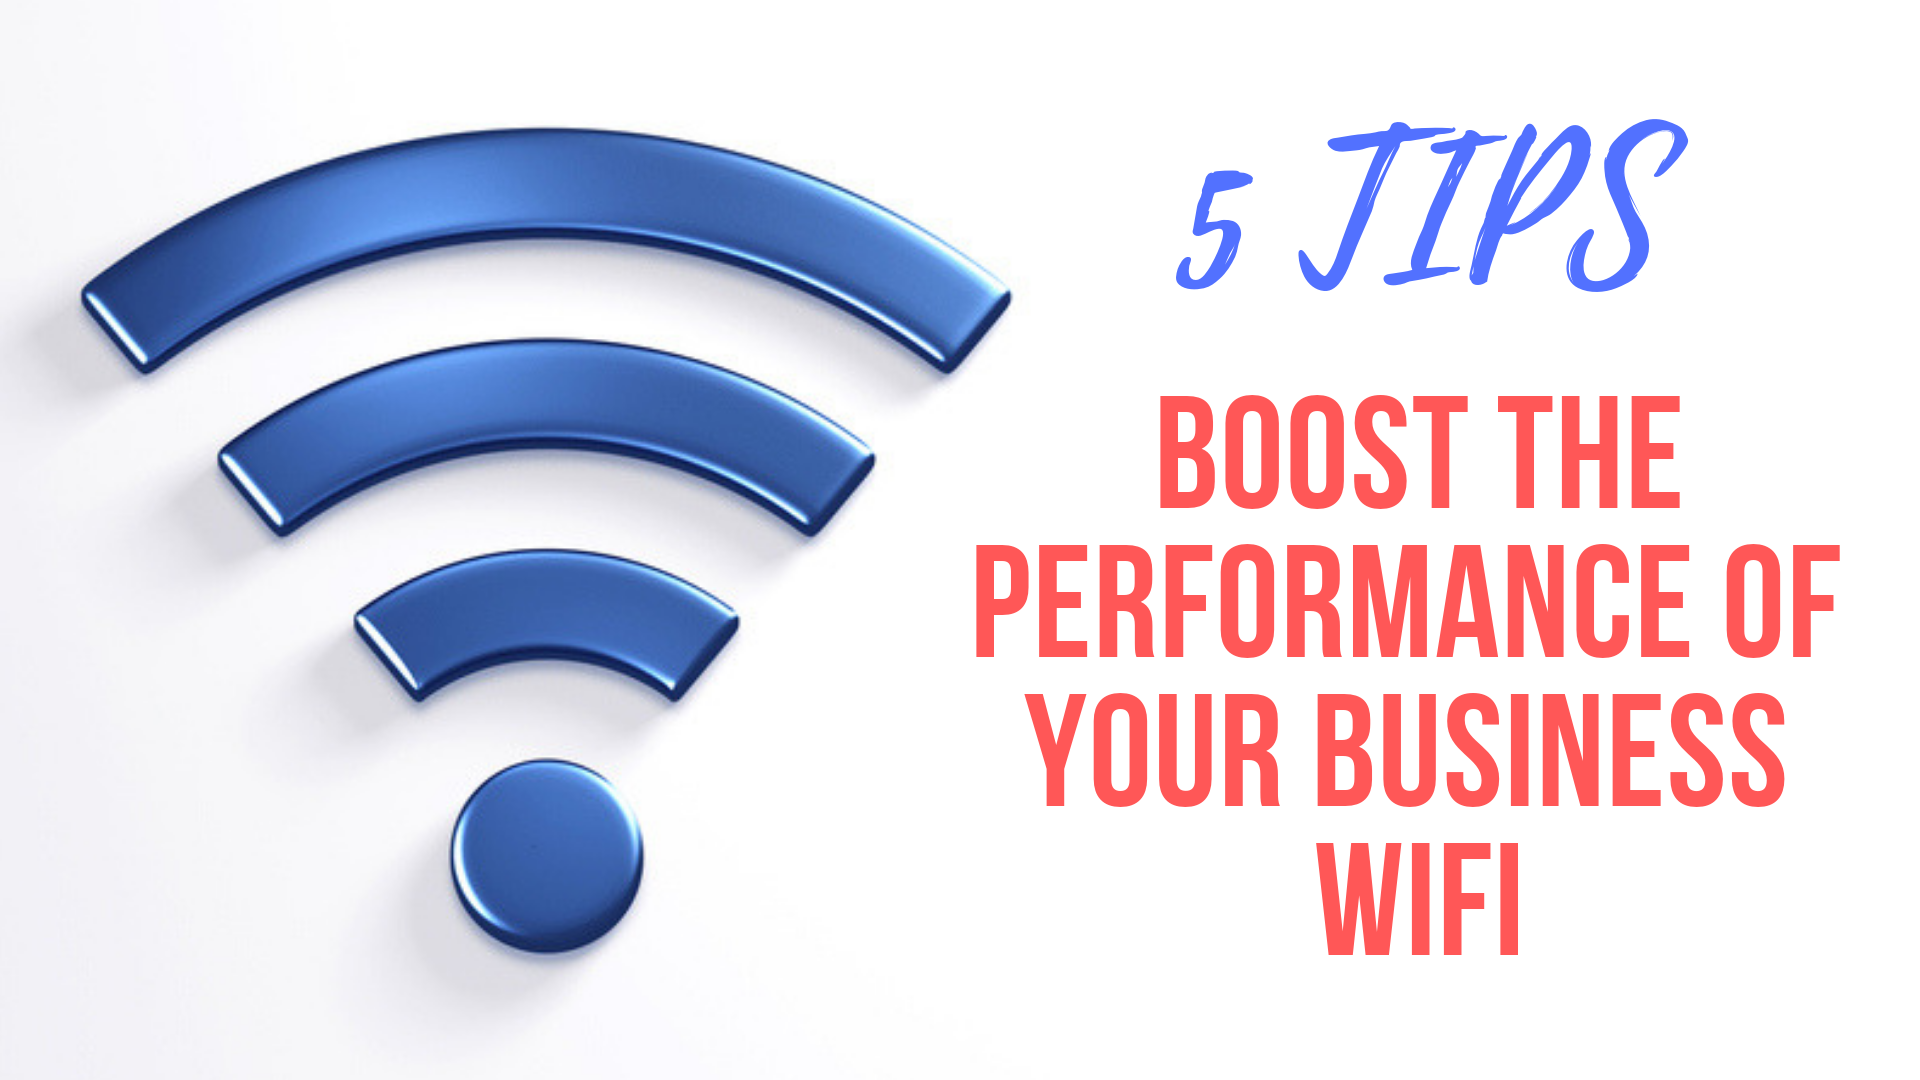 Boost The Performance Of Your Business WiFi